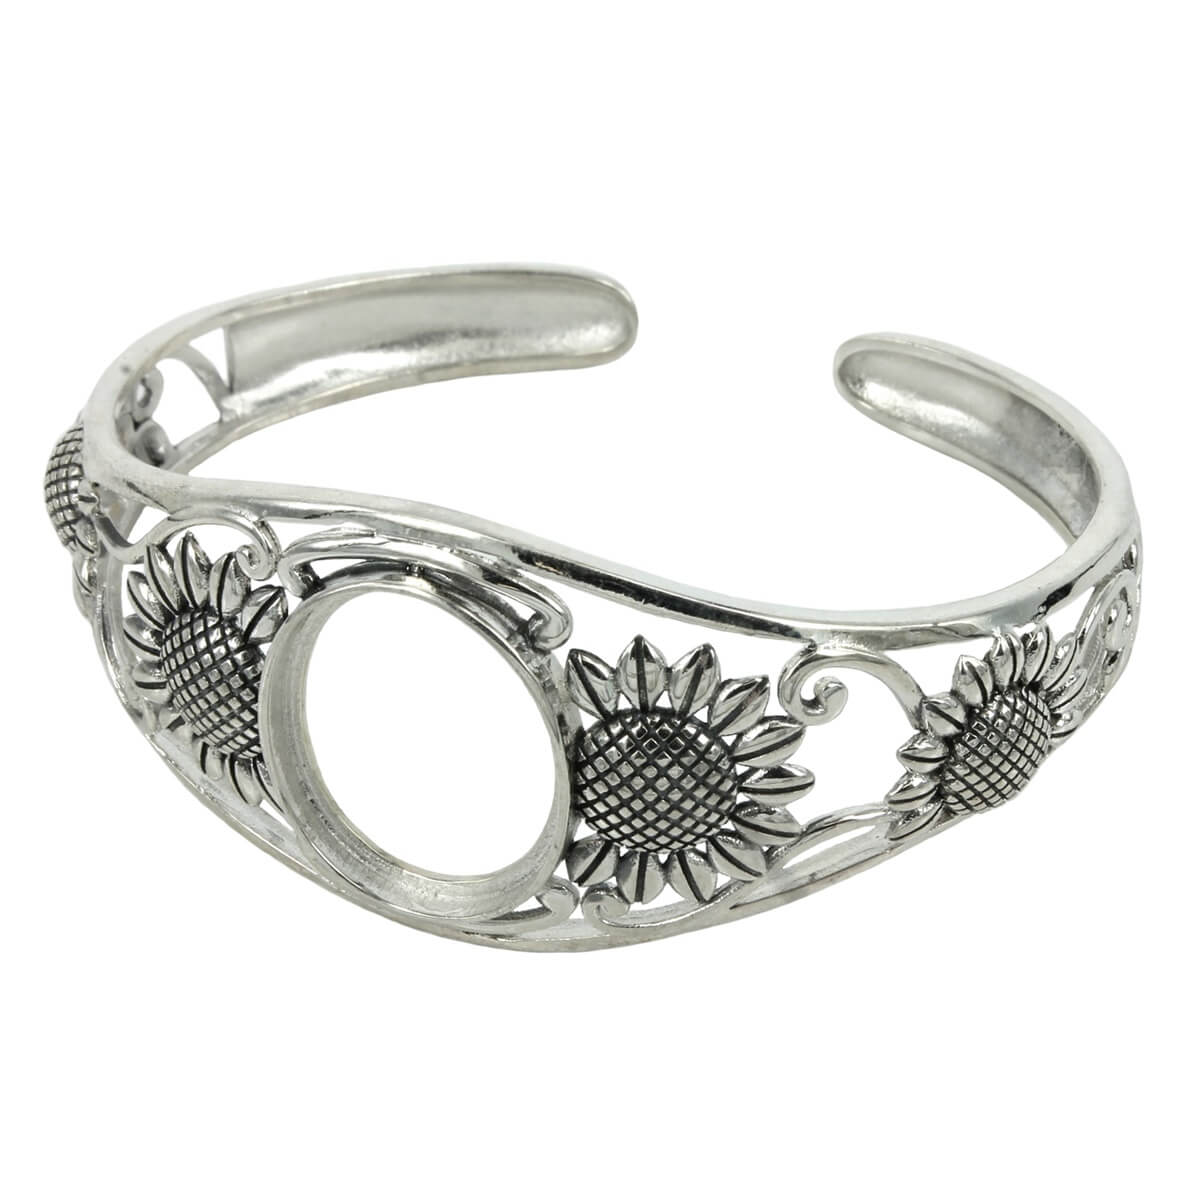 Sunflower Cuff Bracelet with 16x19mm Oval Bezel Mounting in Sterling Silver 